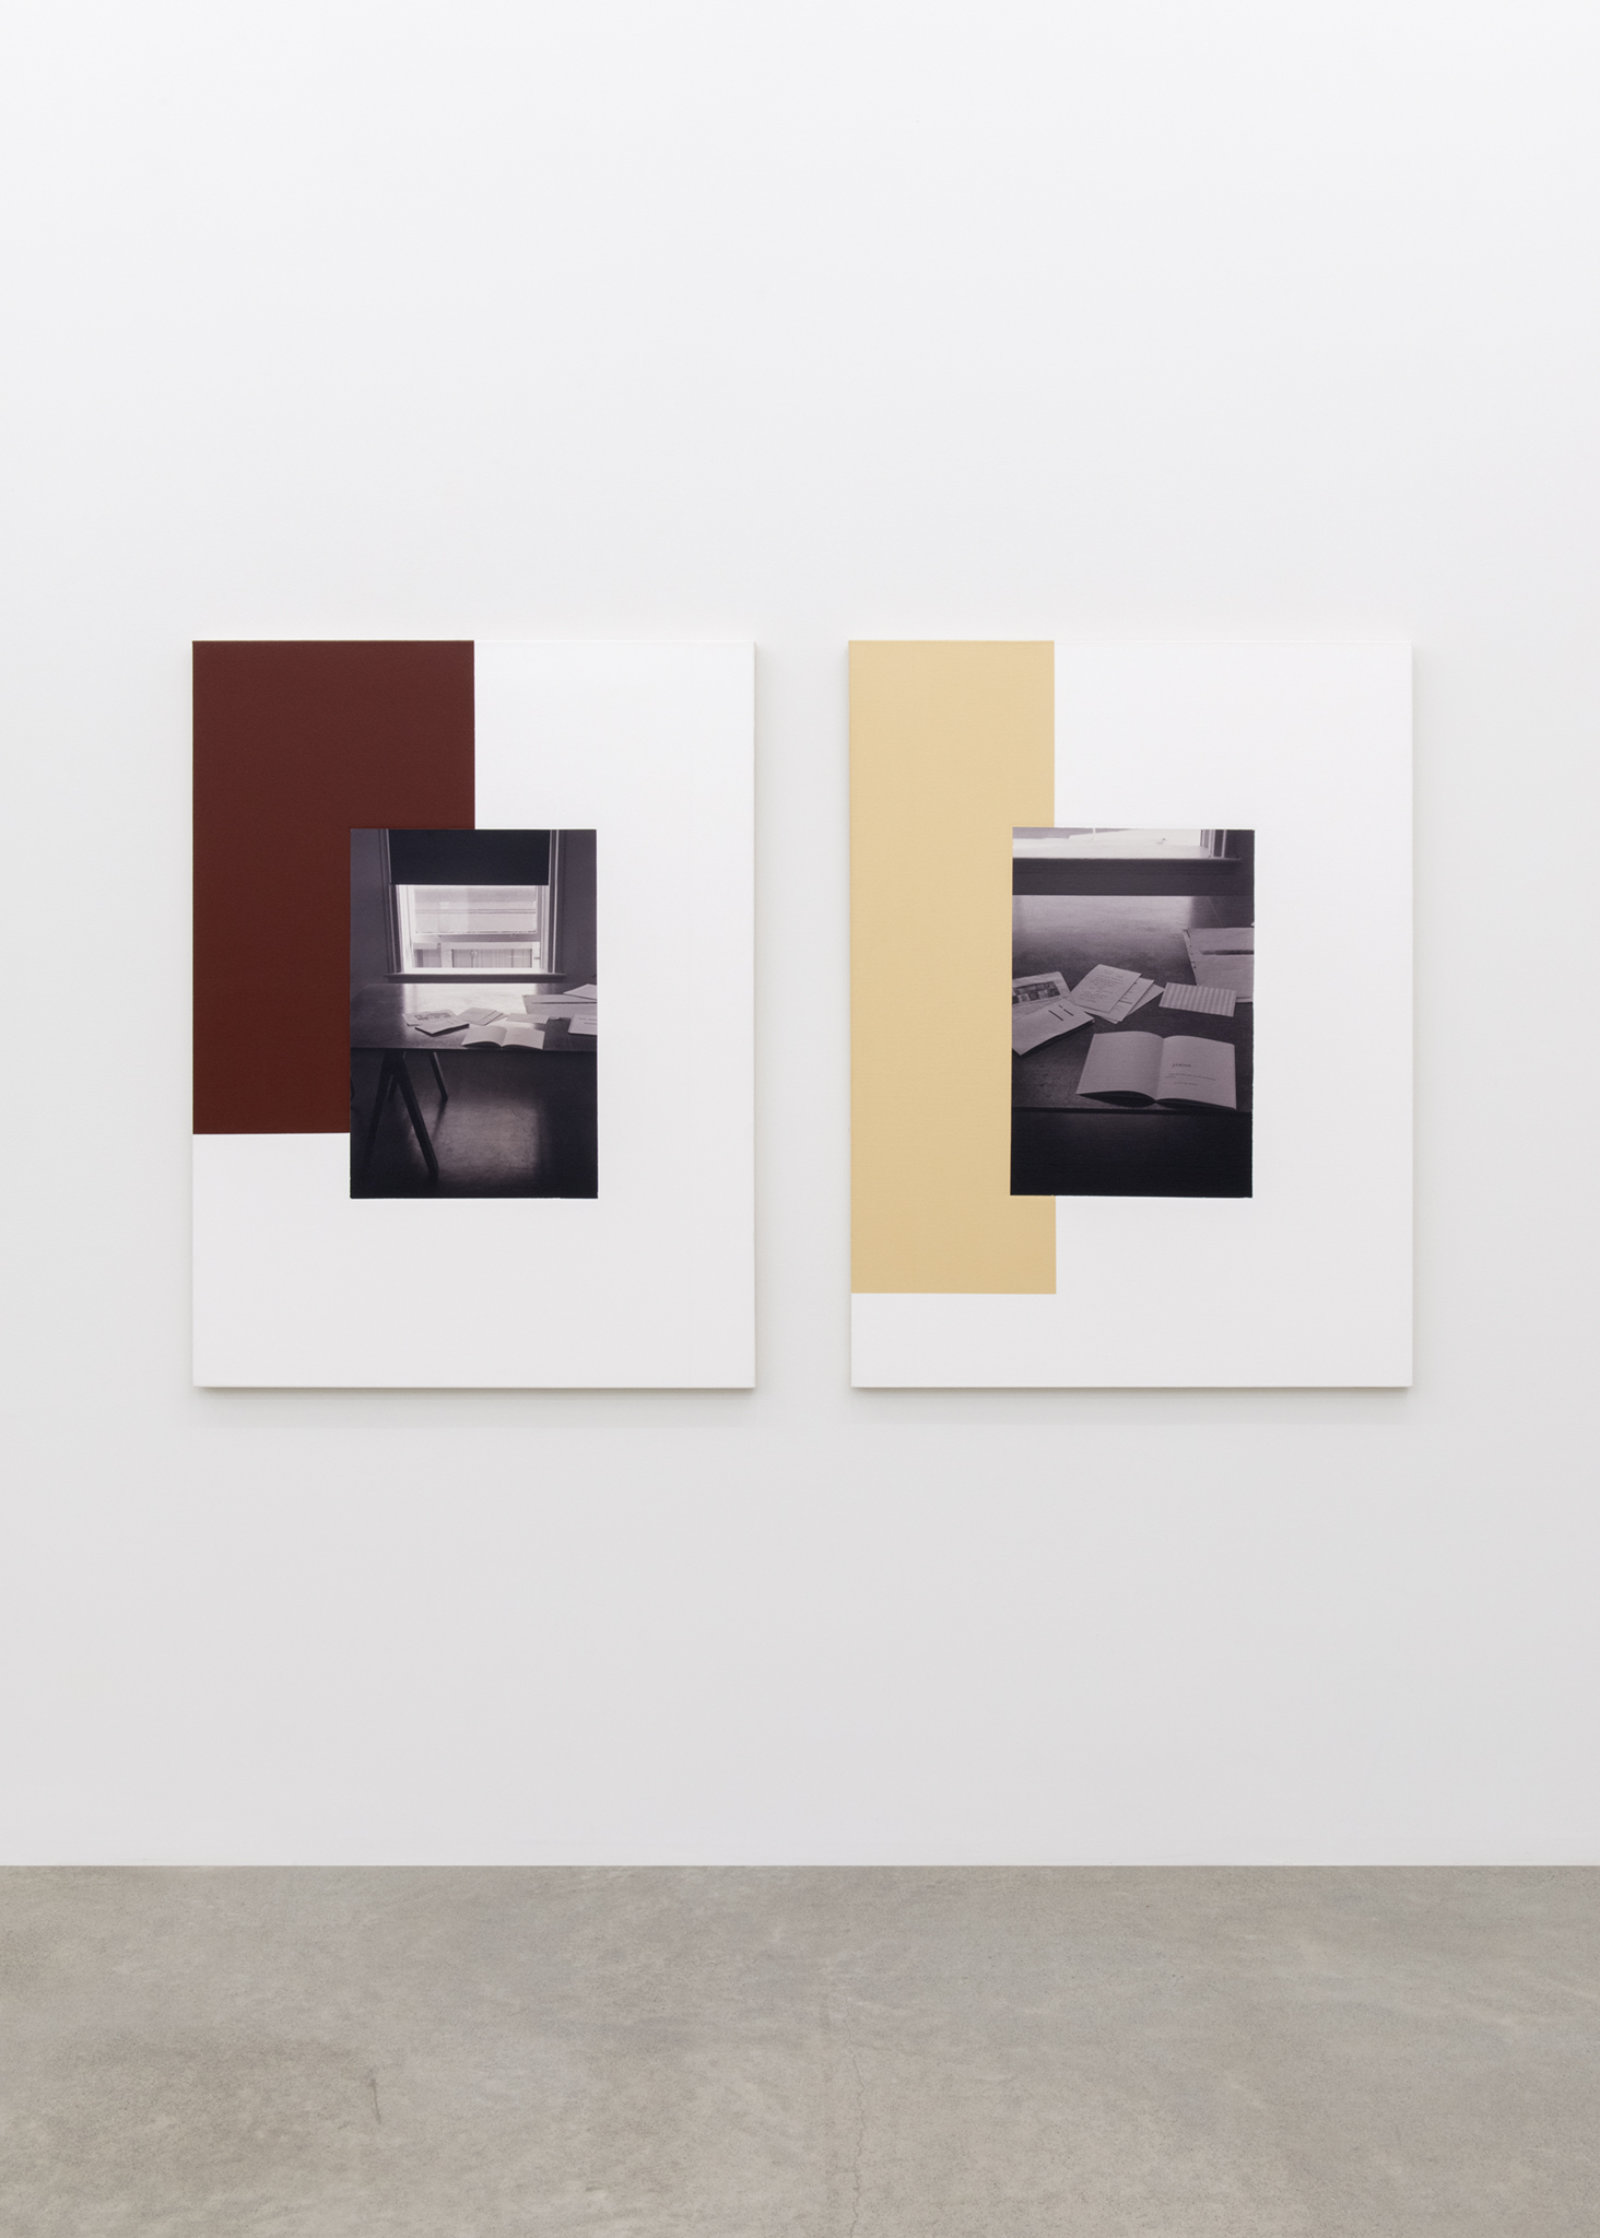 Ian Wallace, The Table (Image/Text) I, II, 1979–2007, photolaminate and acrylic on canvas, each 48 x 72 in. (122 x 183 cm)